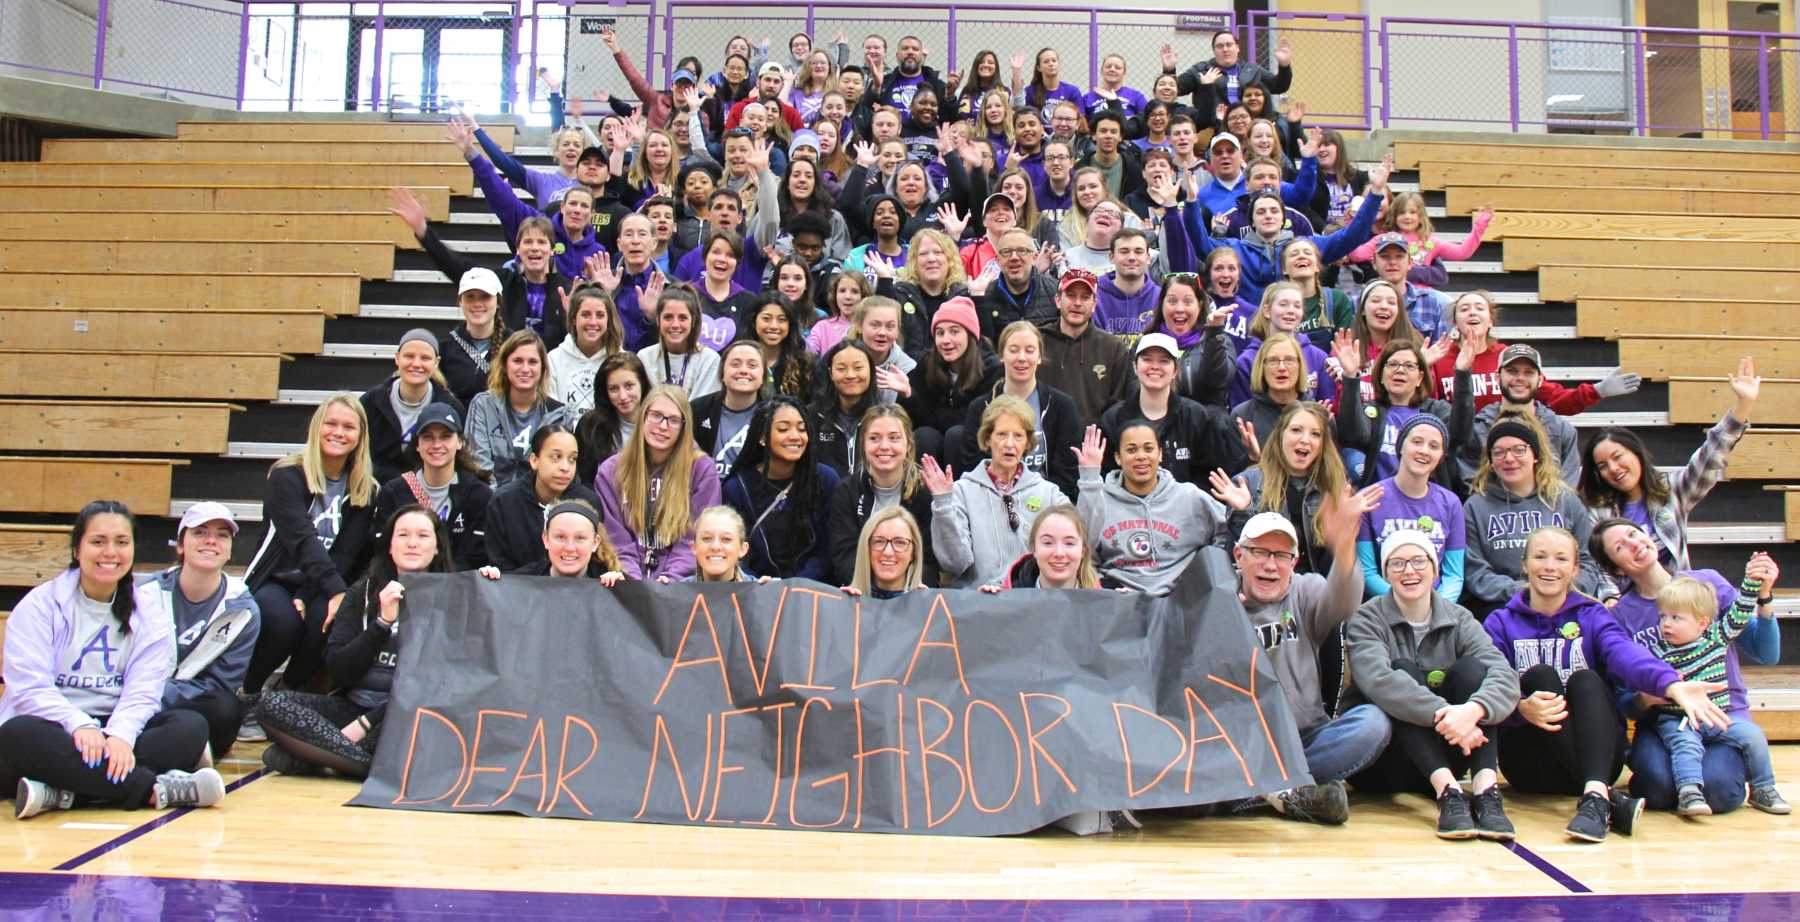 2019 Group shot of Dear Neighbor Day participants in Mabee Fieldhouse